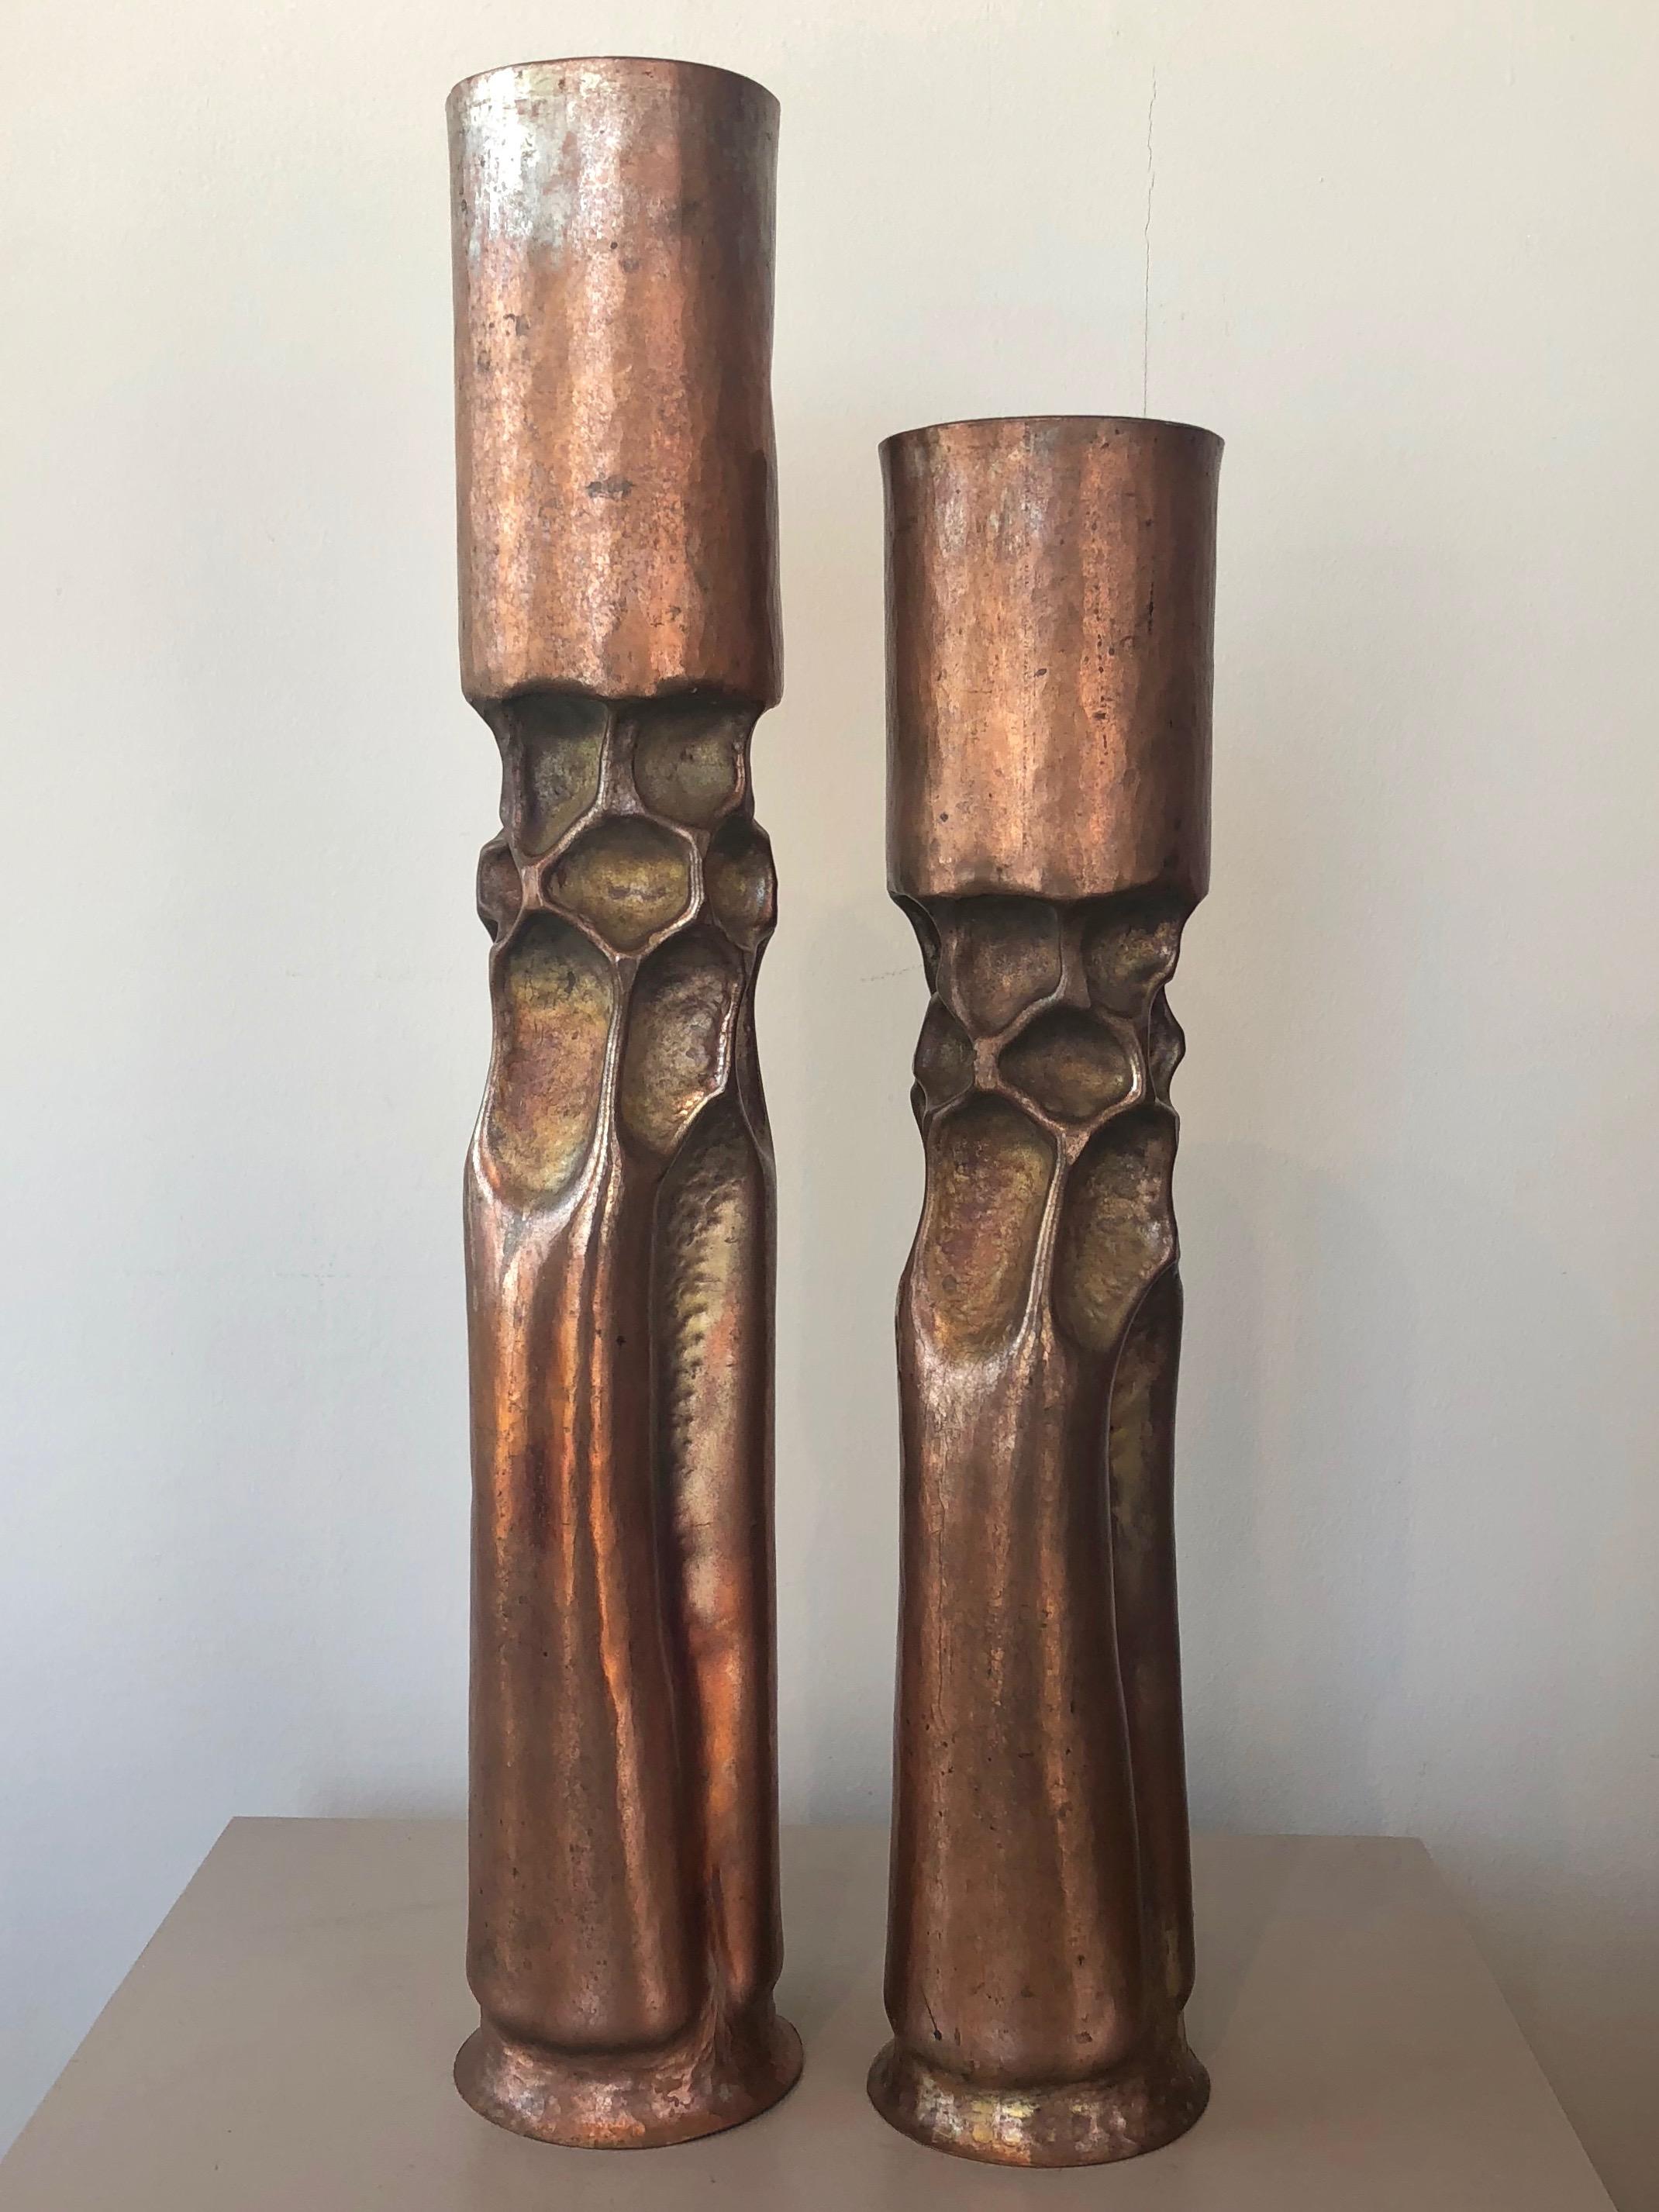 An early pair of large 1970s Brutalist copper candleholders by master metalsmith and sculptor Thomas Roy Markusen.

Tall, tortured form of hammered and shaped copper has an organic yet alien aesthetic. Artistically applied heat oxidized patina